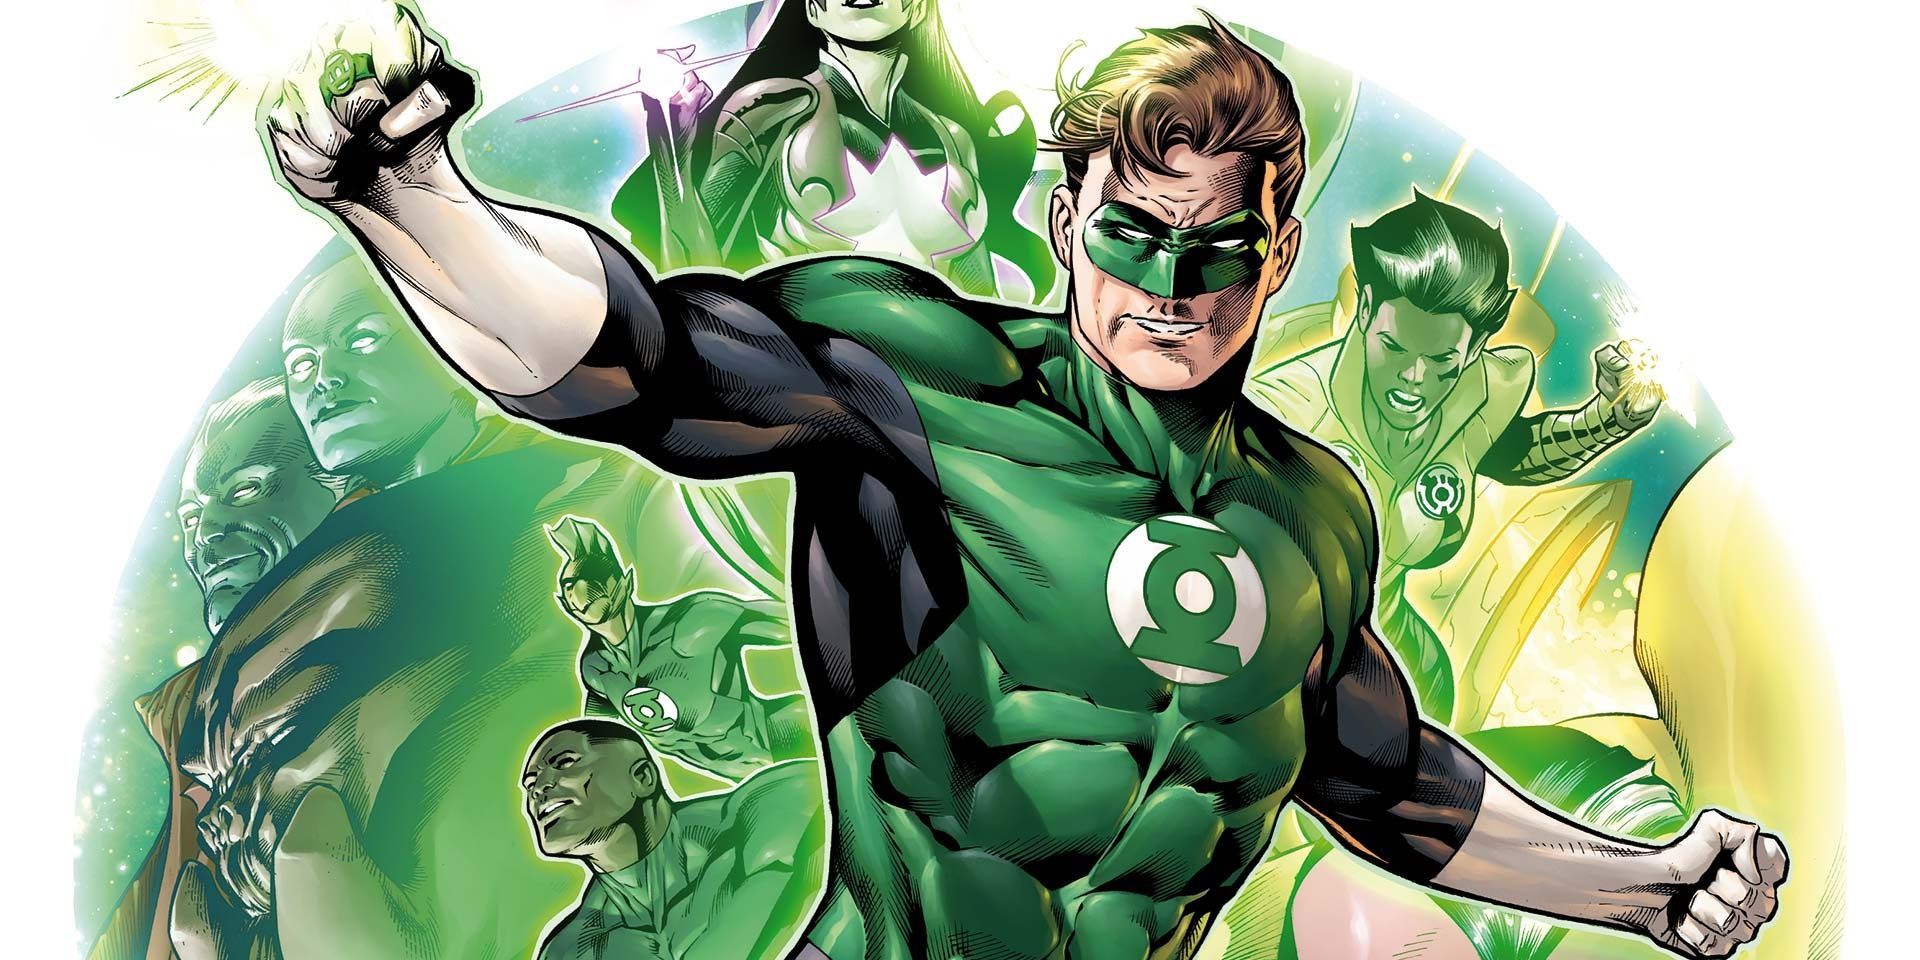 Hal Jordan and other members of the Green Lantern Corps